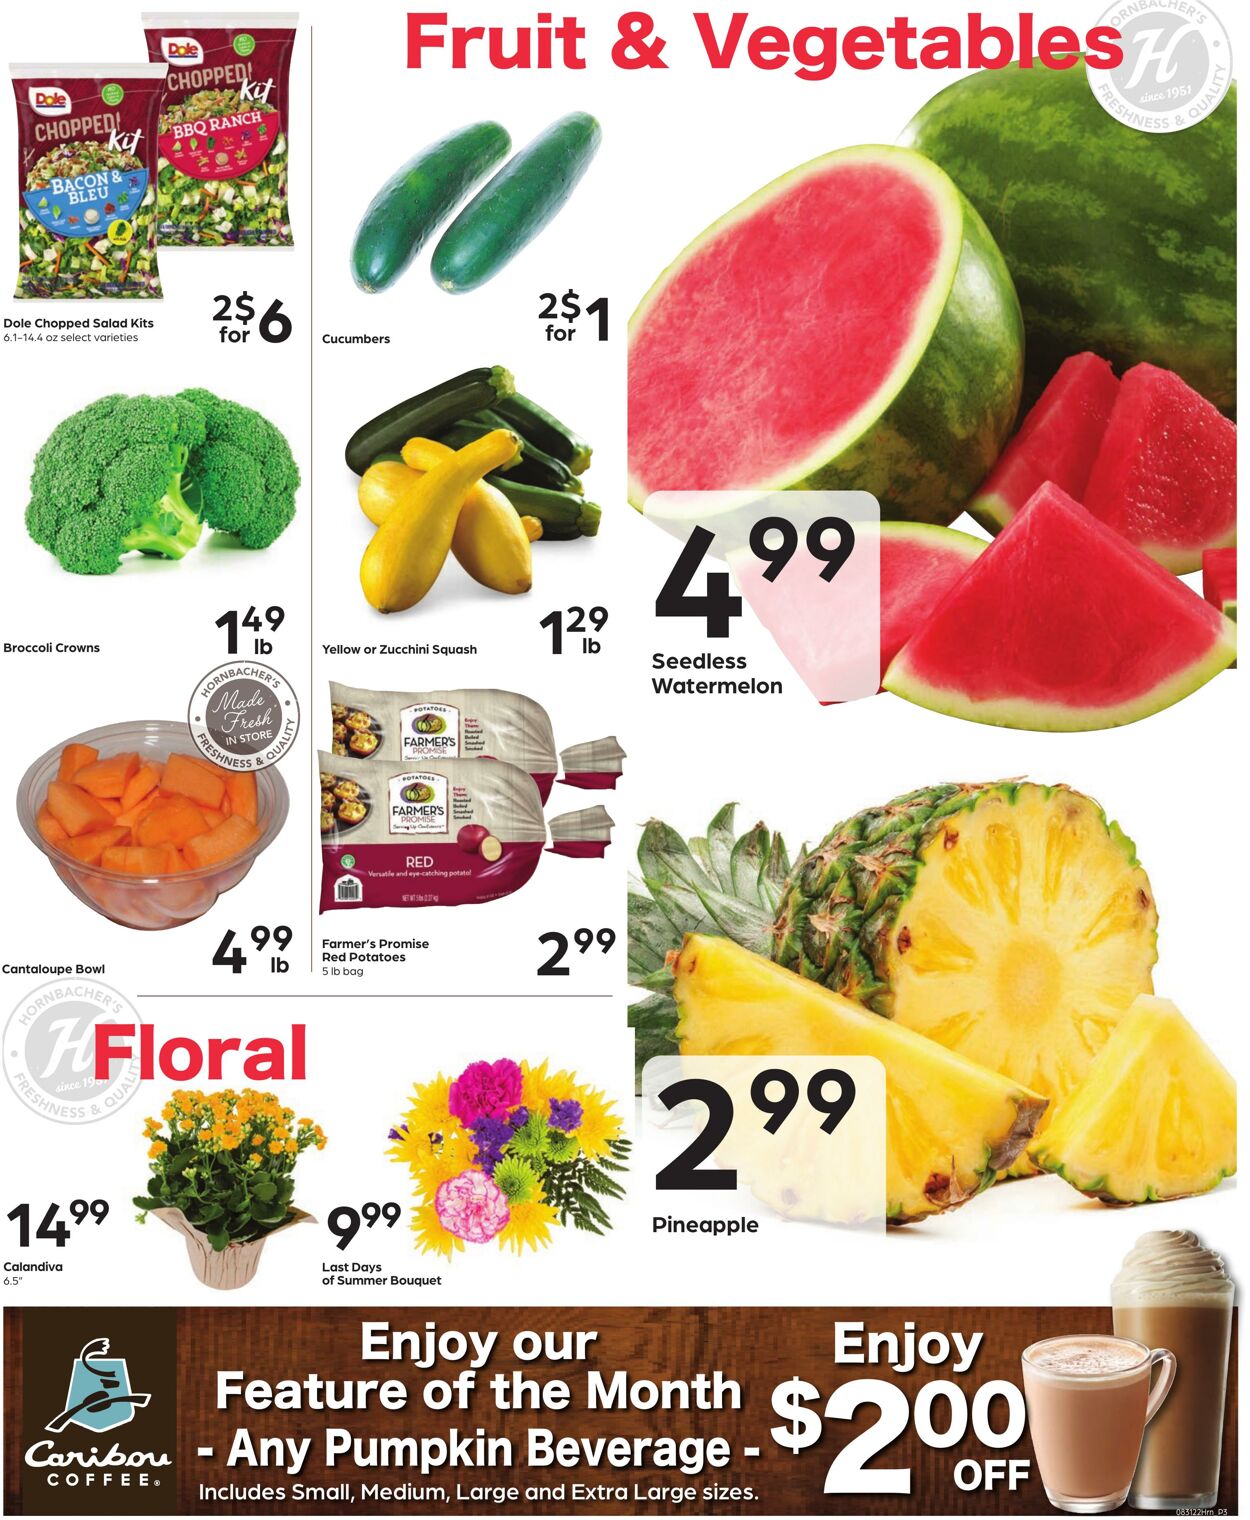 Weekly ad Hornbacher's 08/31/2022 - 09/06/2022